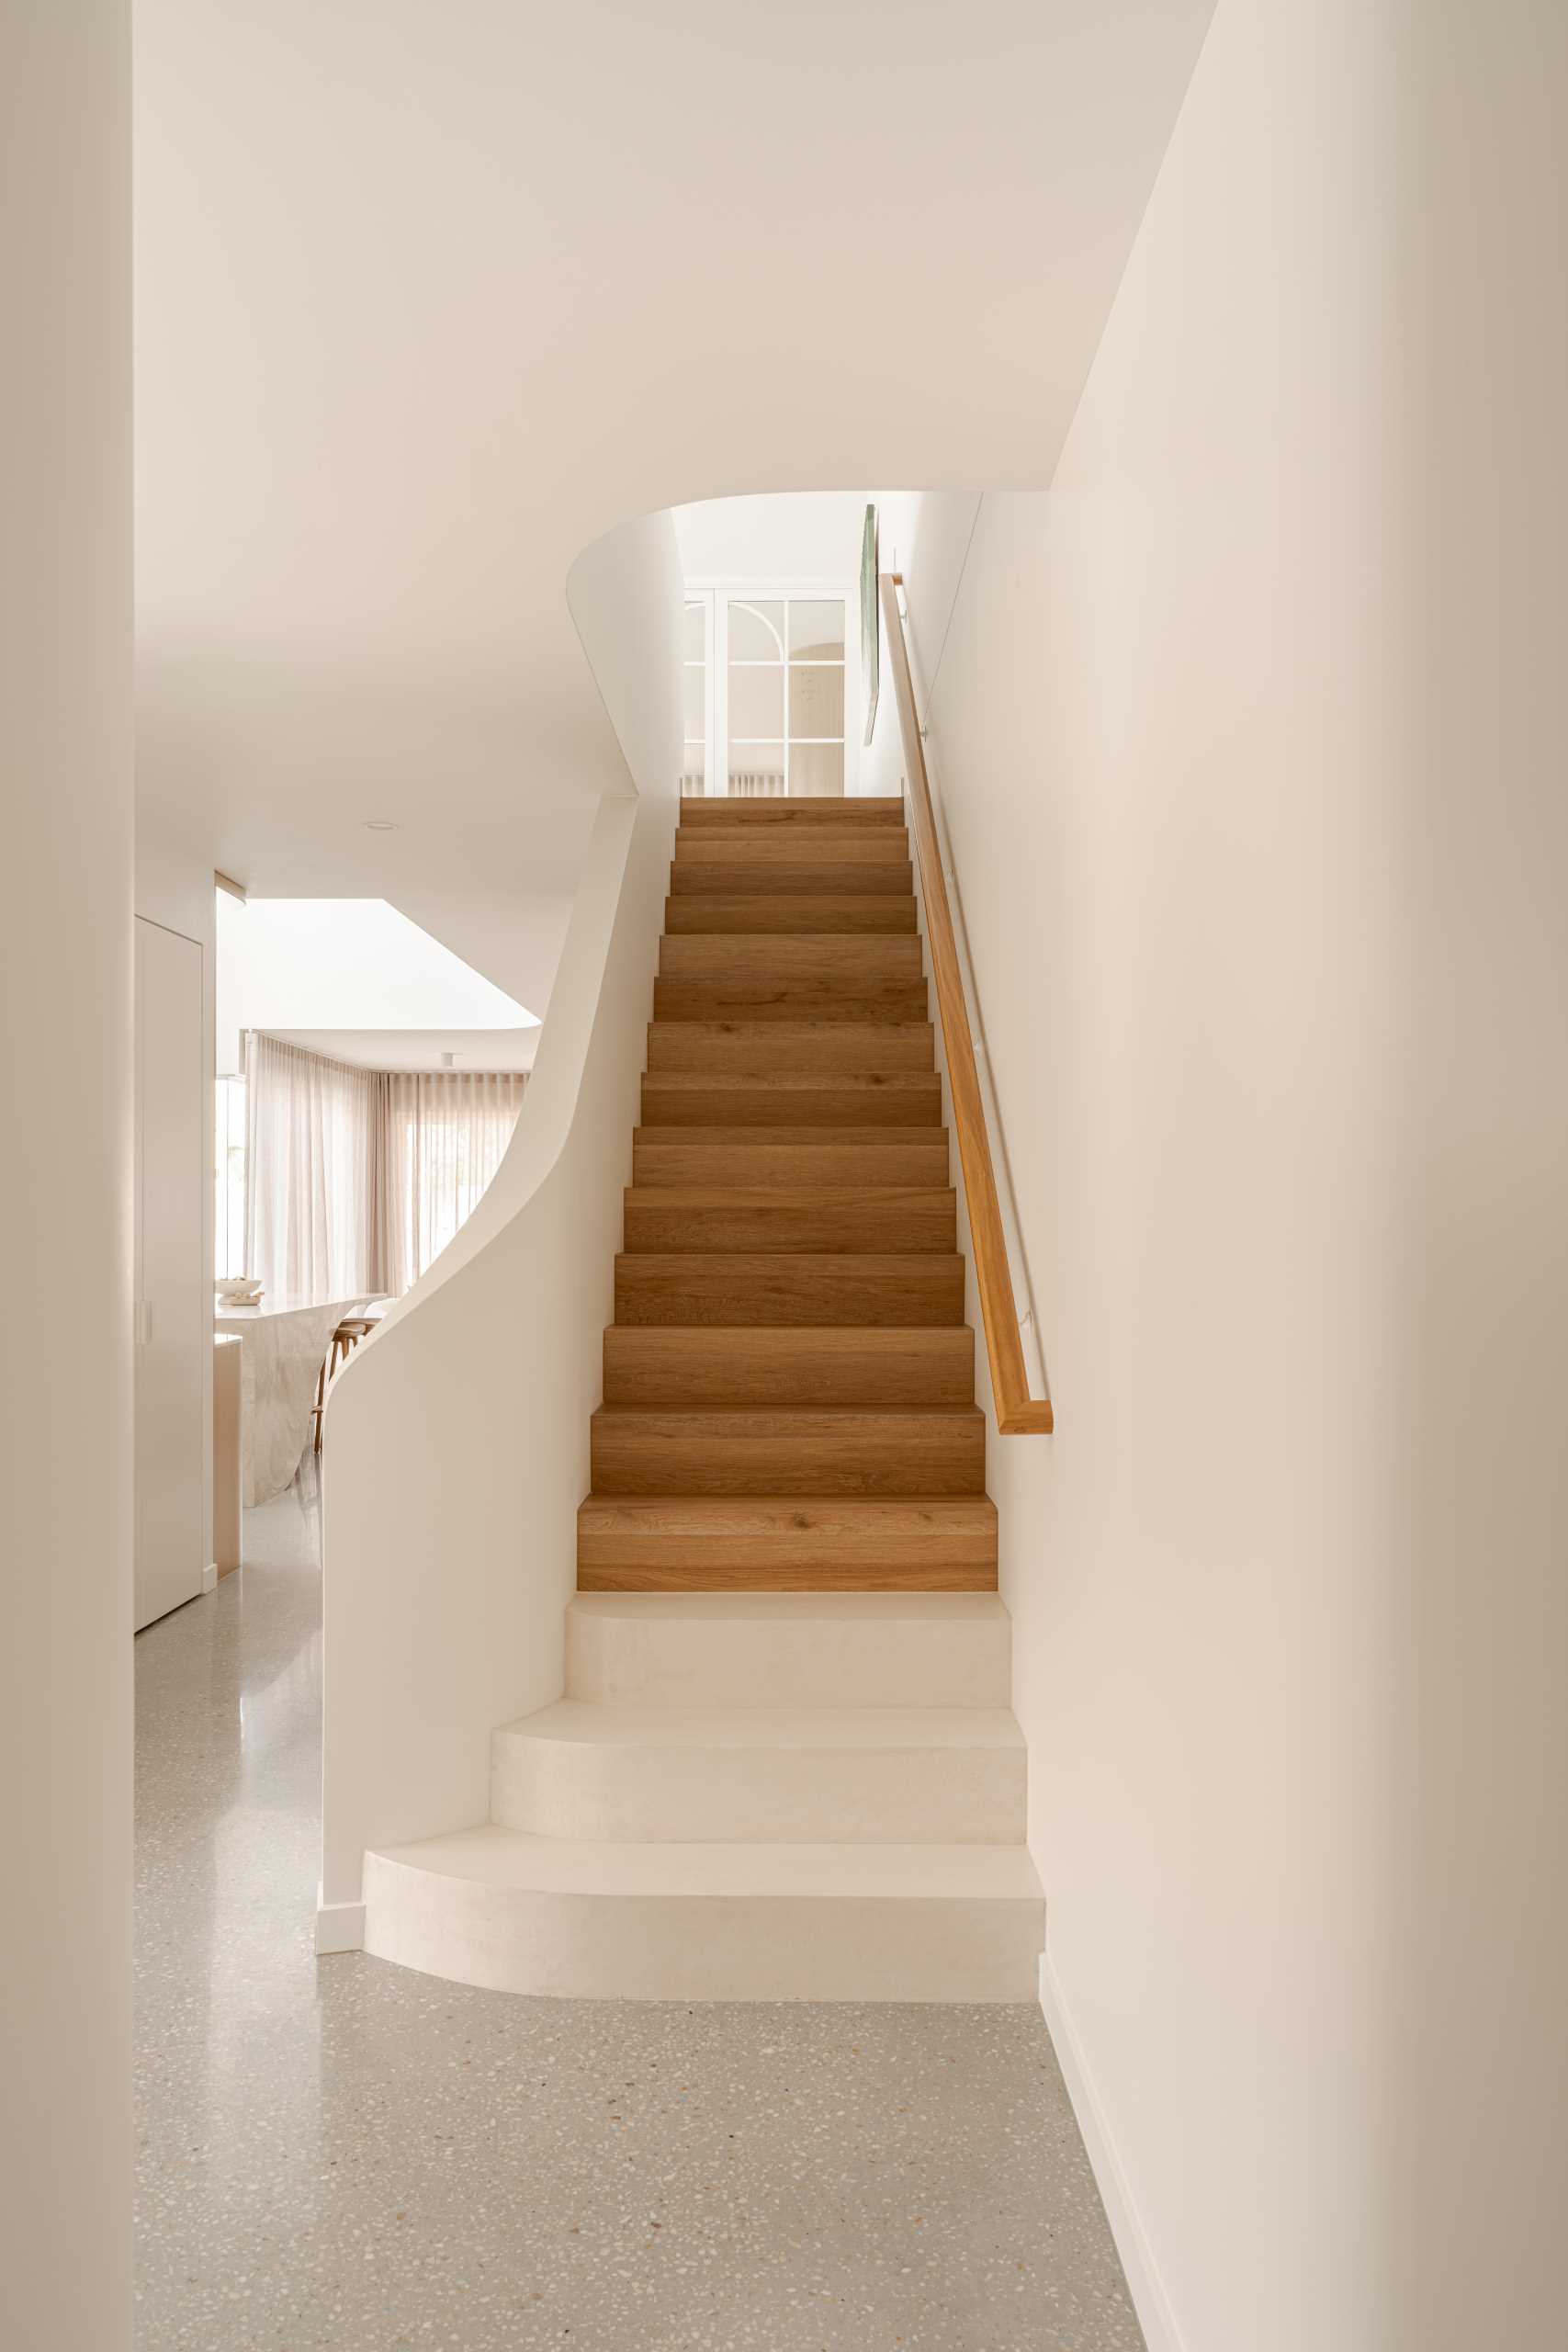 Wood stairs lead to the upper floor of this contemporary home with a neutral color palette.